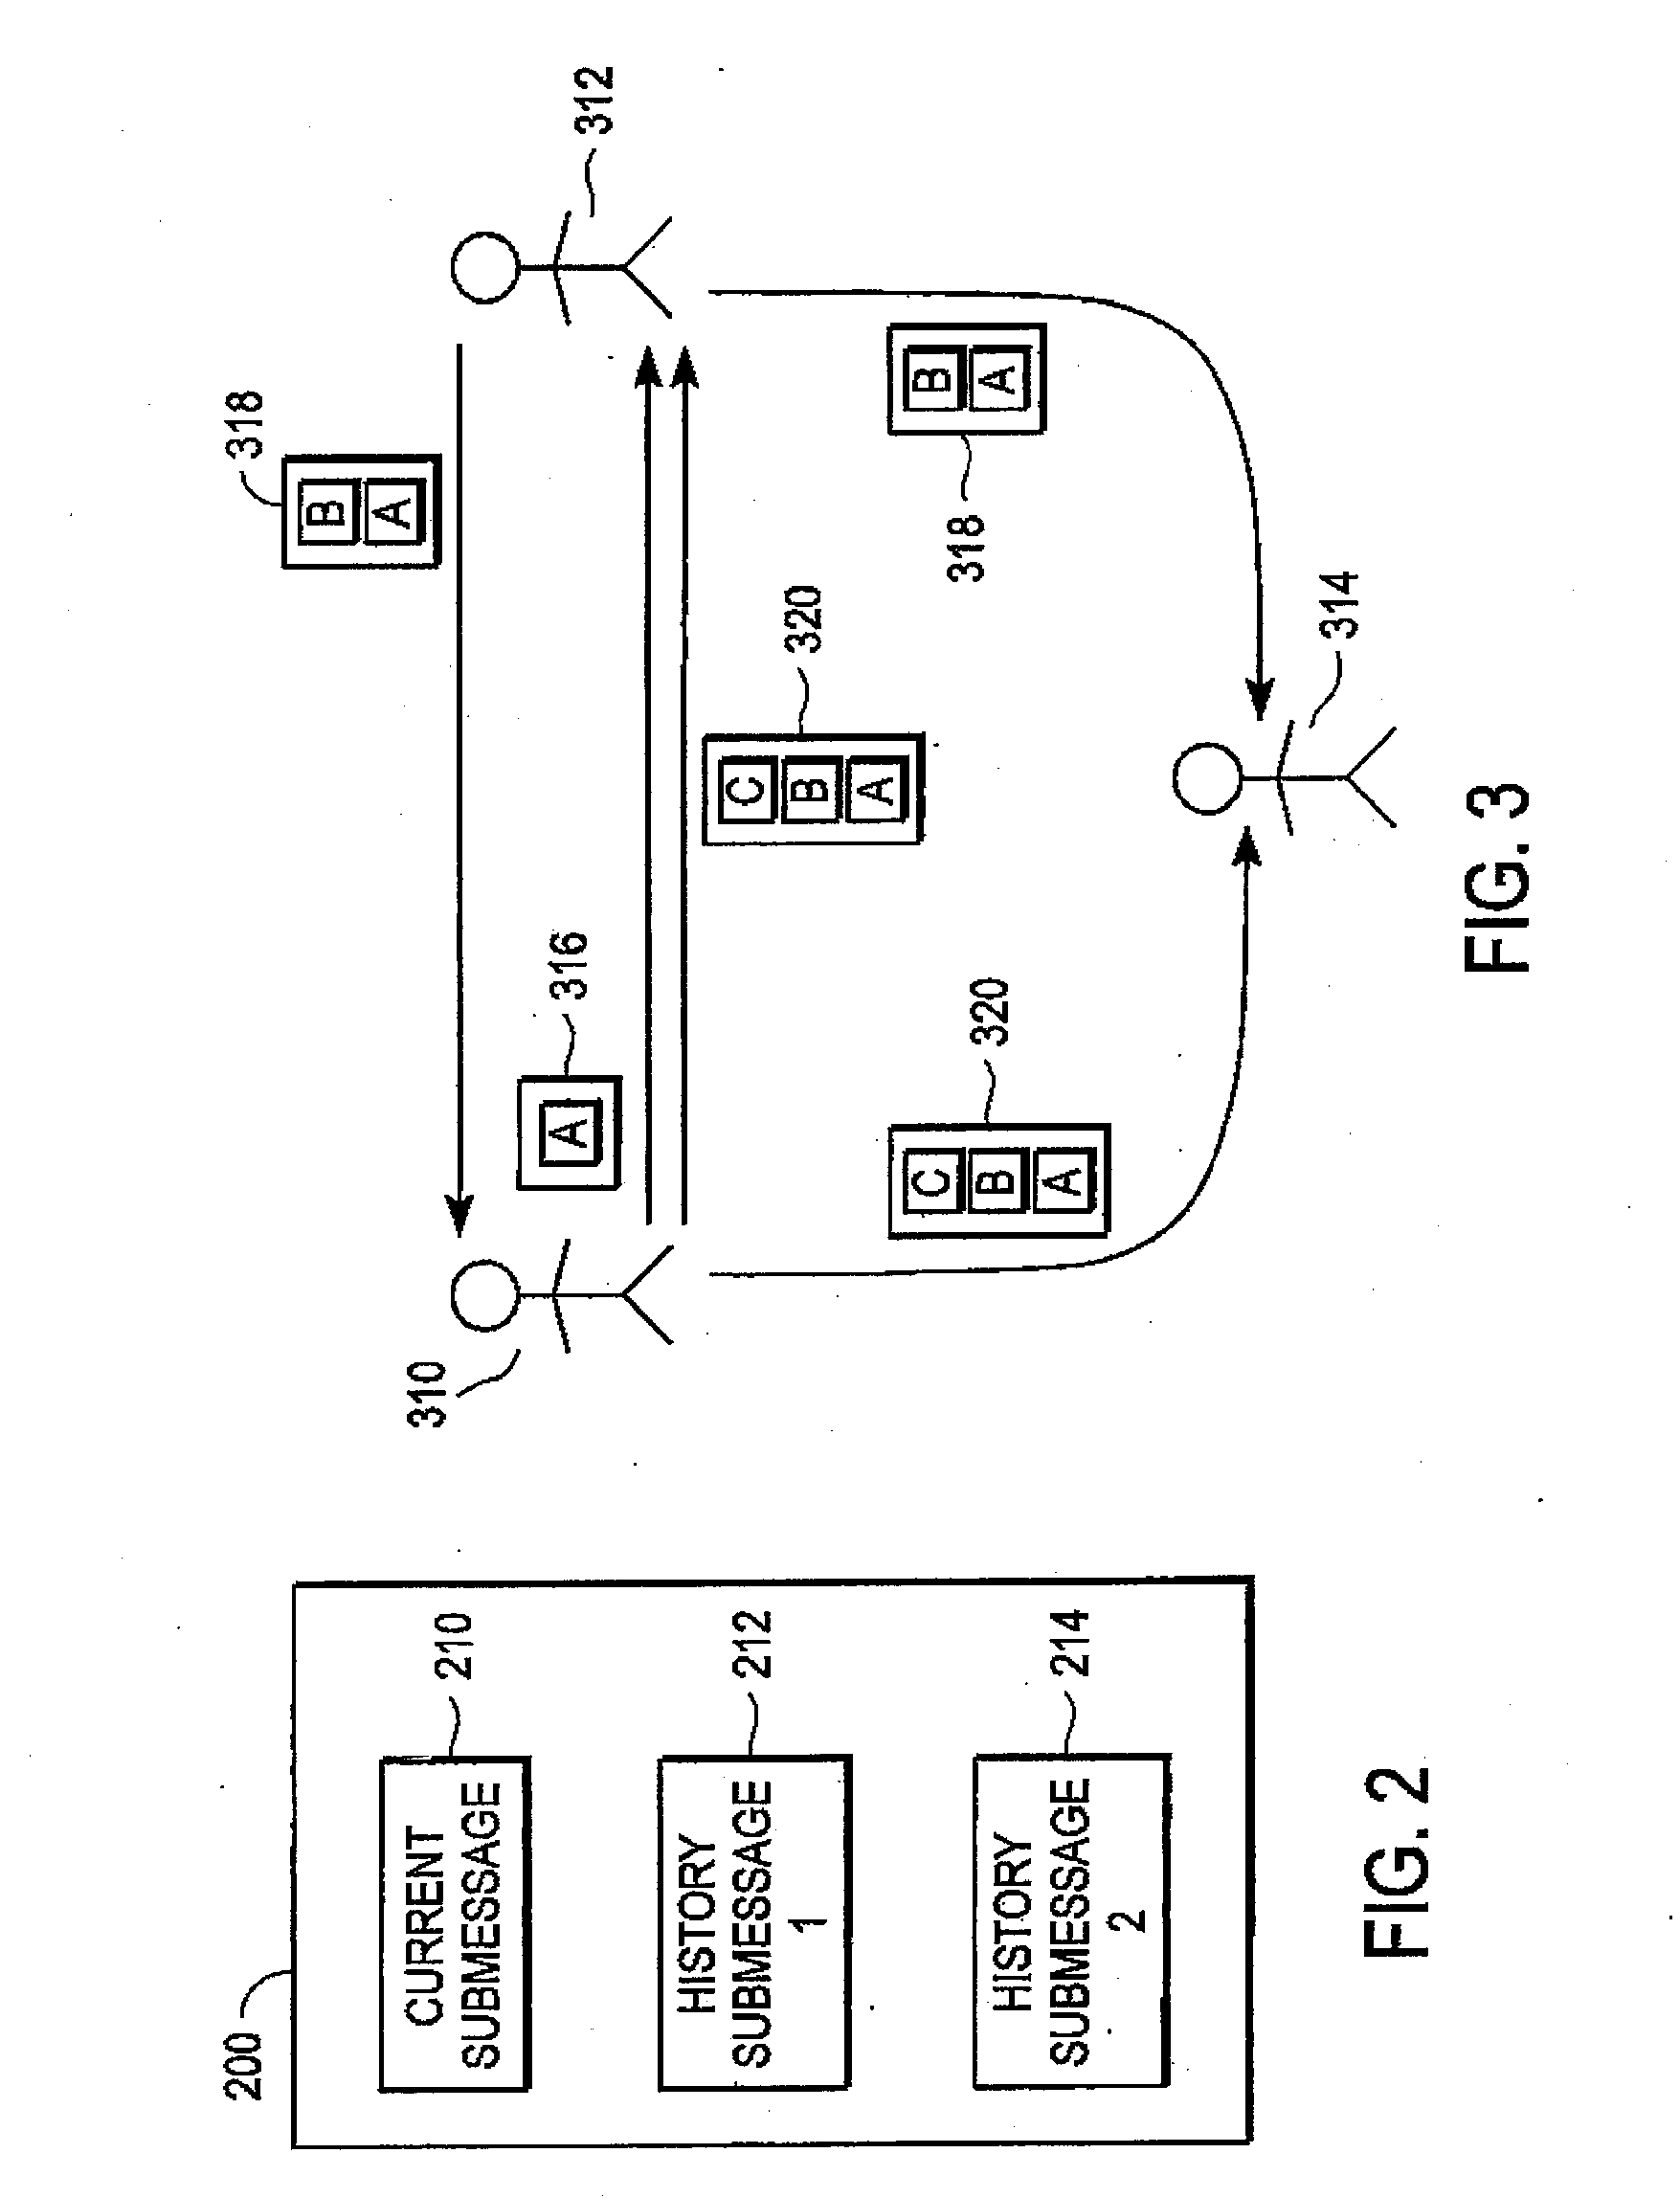 Providing context in an electronic messaging system